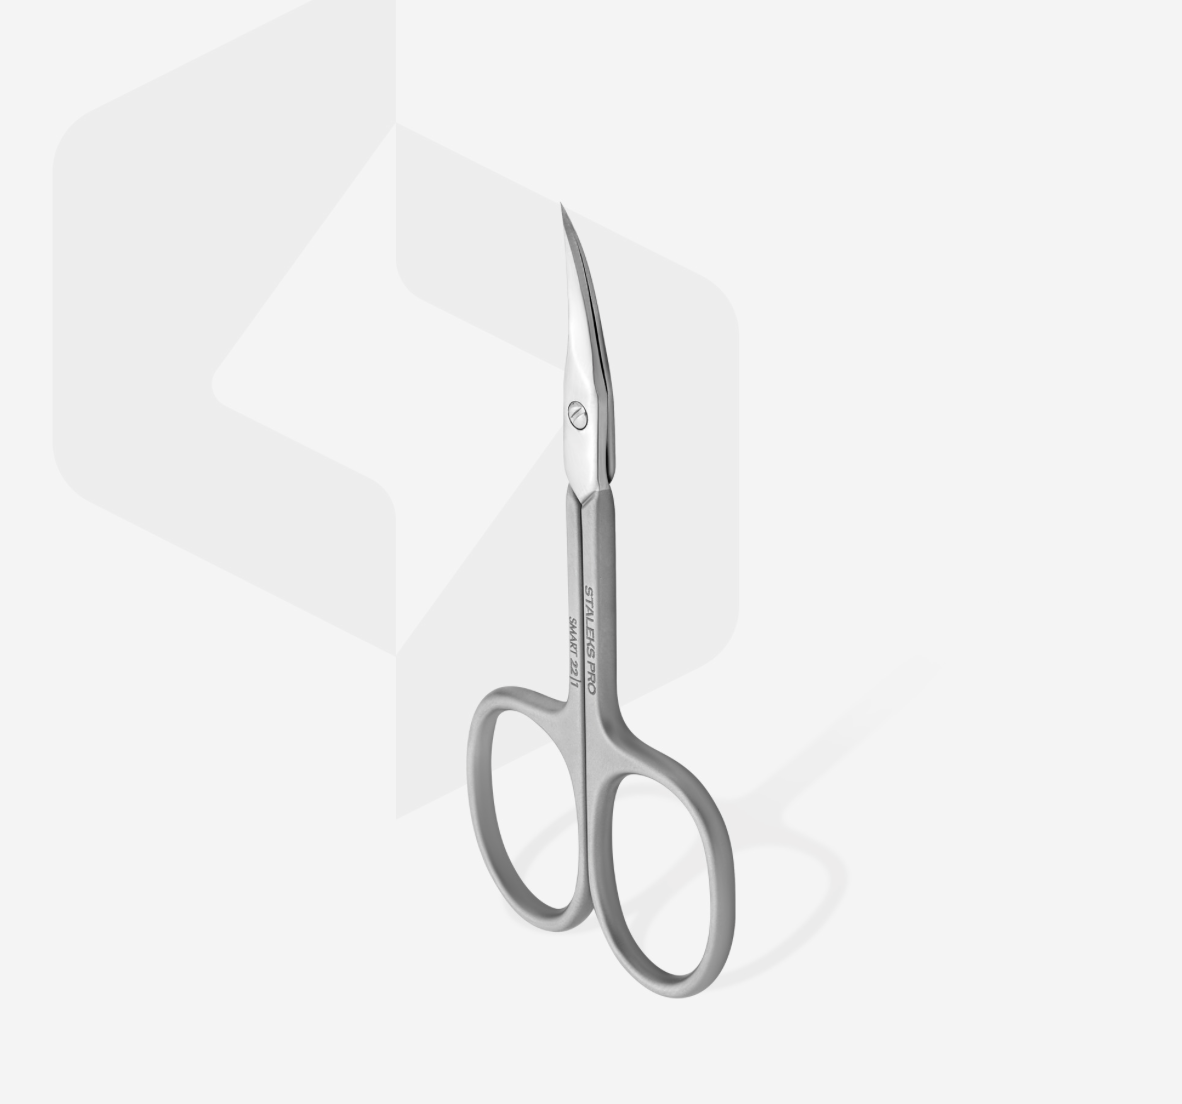 Hans Kniebes 2-in-1 Nail Scissors with Blades for Cuticles Stainless Steel